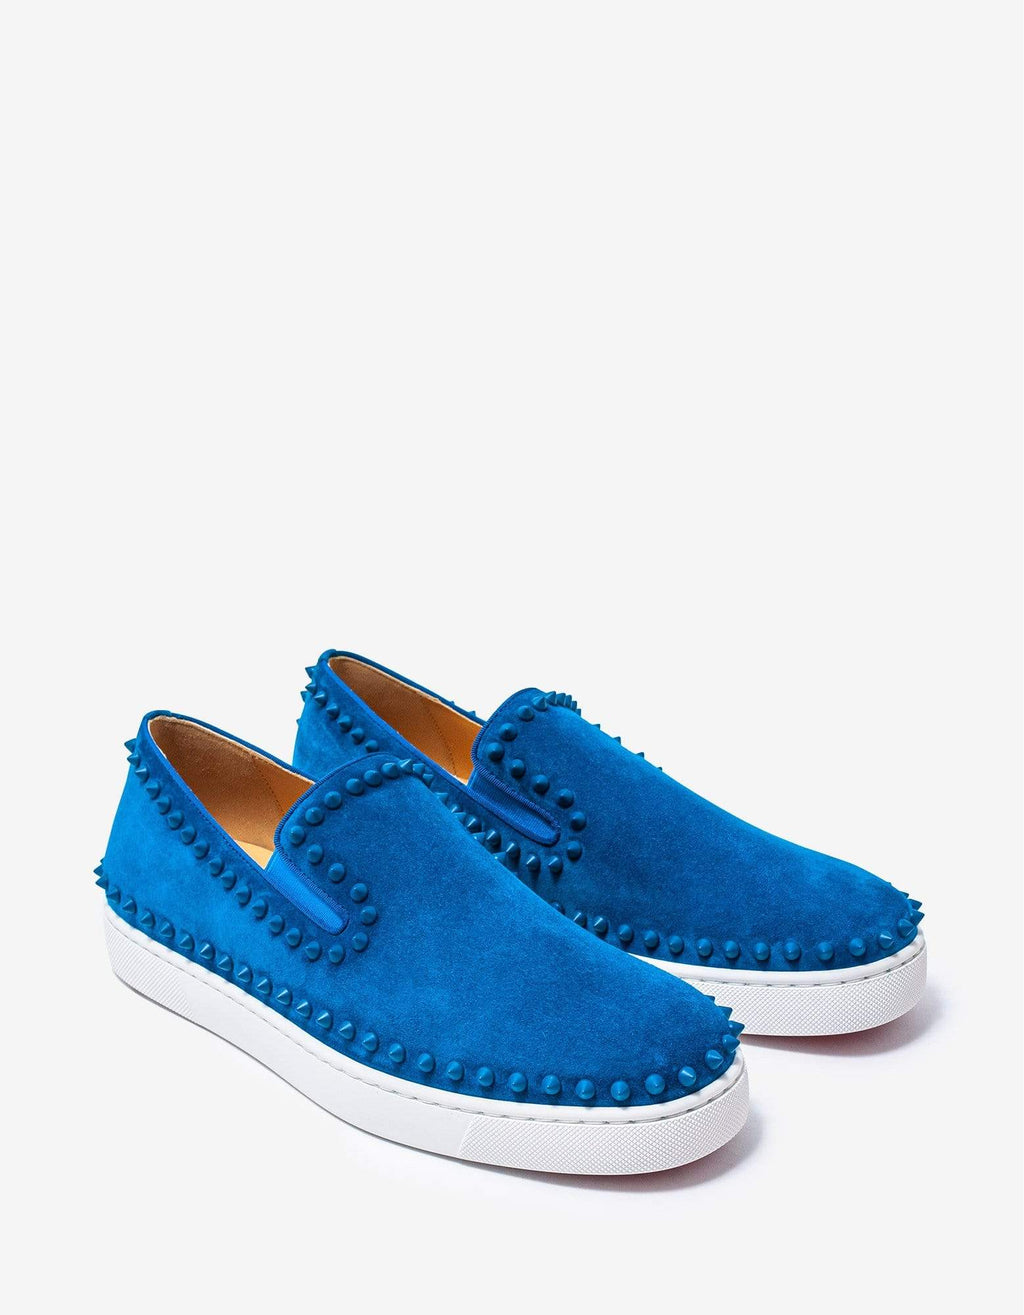 Christian Louboutin Christian Louboutin Pik Boat Blue Suede Leather Trainers